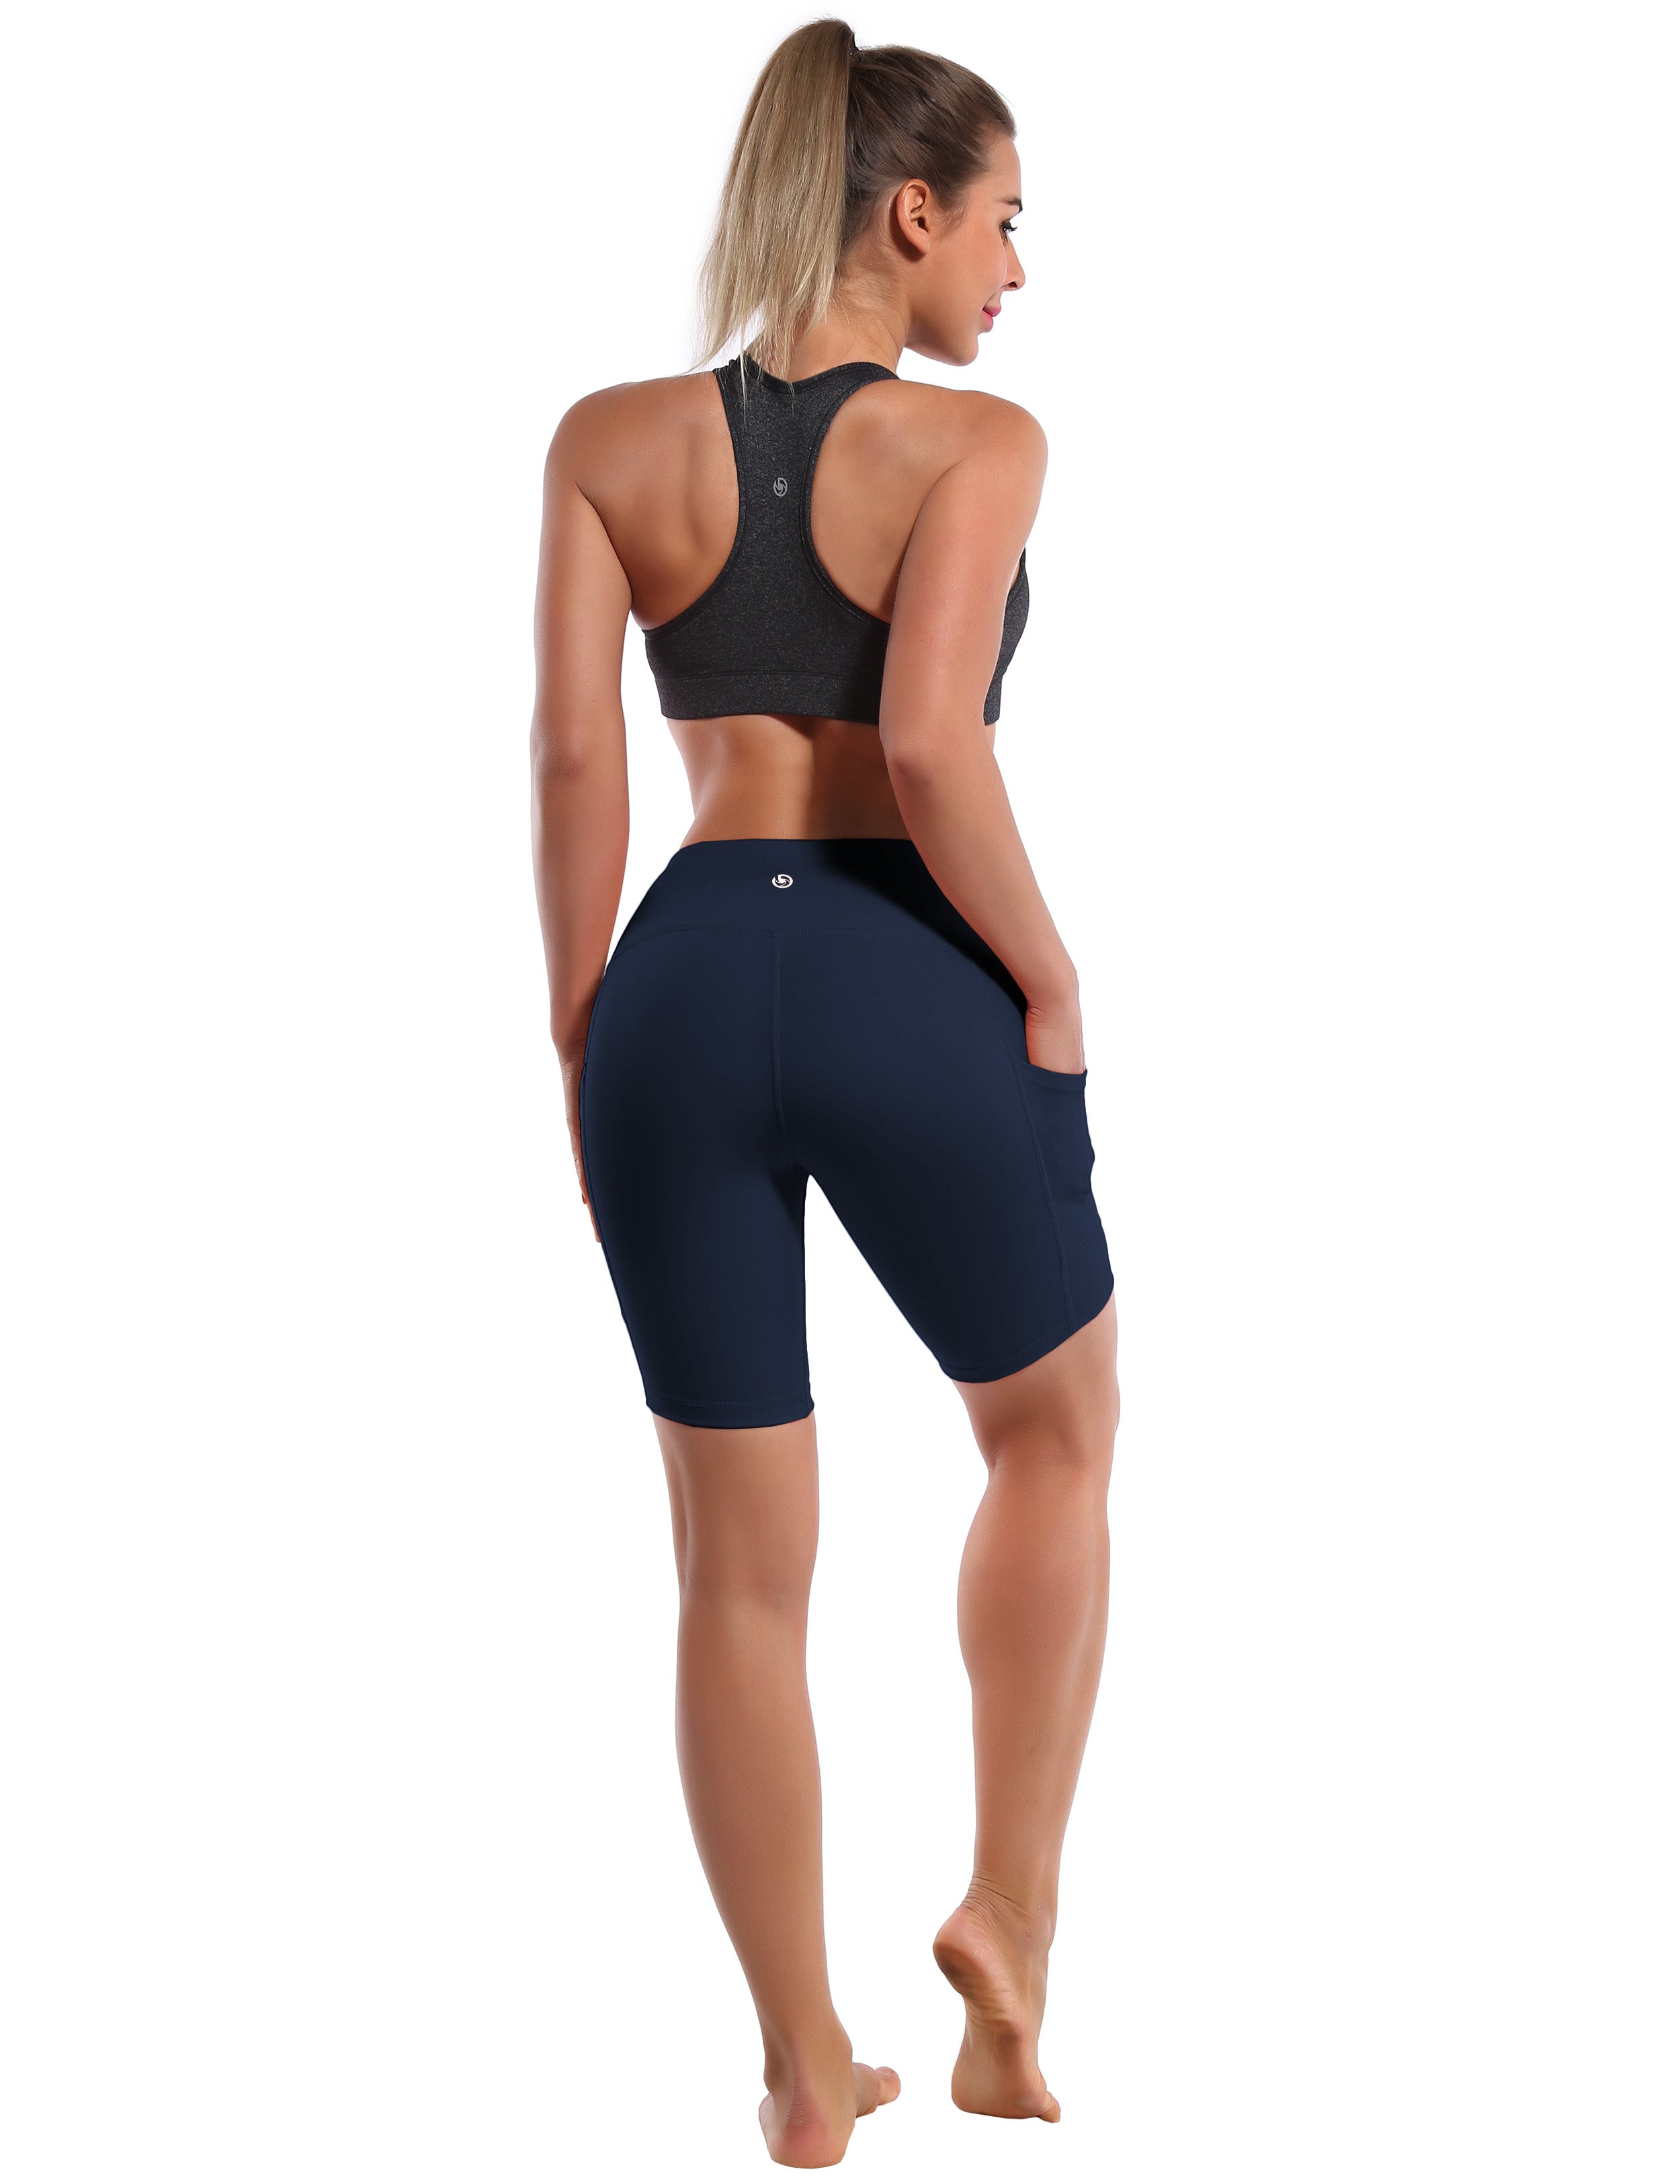 8" Side Pockets Biking Shorts darknavy Sleek, soft, smooth and totally comfortable: our newest style is here. Softest-ever fabric High elasticity High density 4-way stretch Fabric doesn't attract lint easily No see-through Moisture-wicking Machine wash 75% Nylon, 25% Spandex